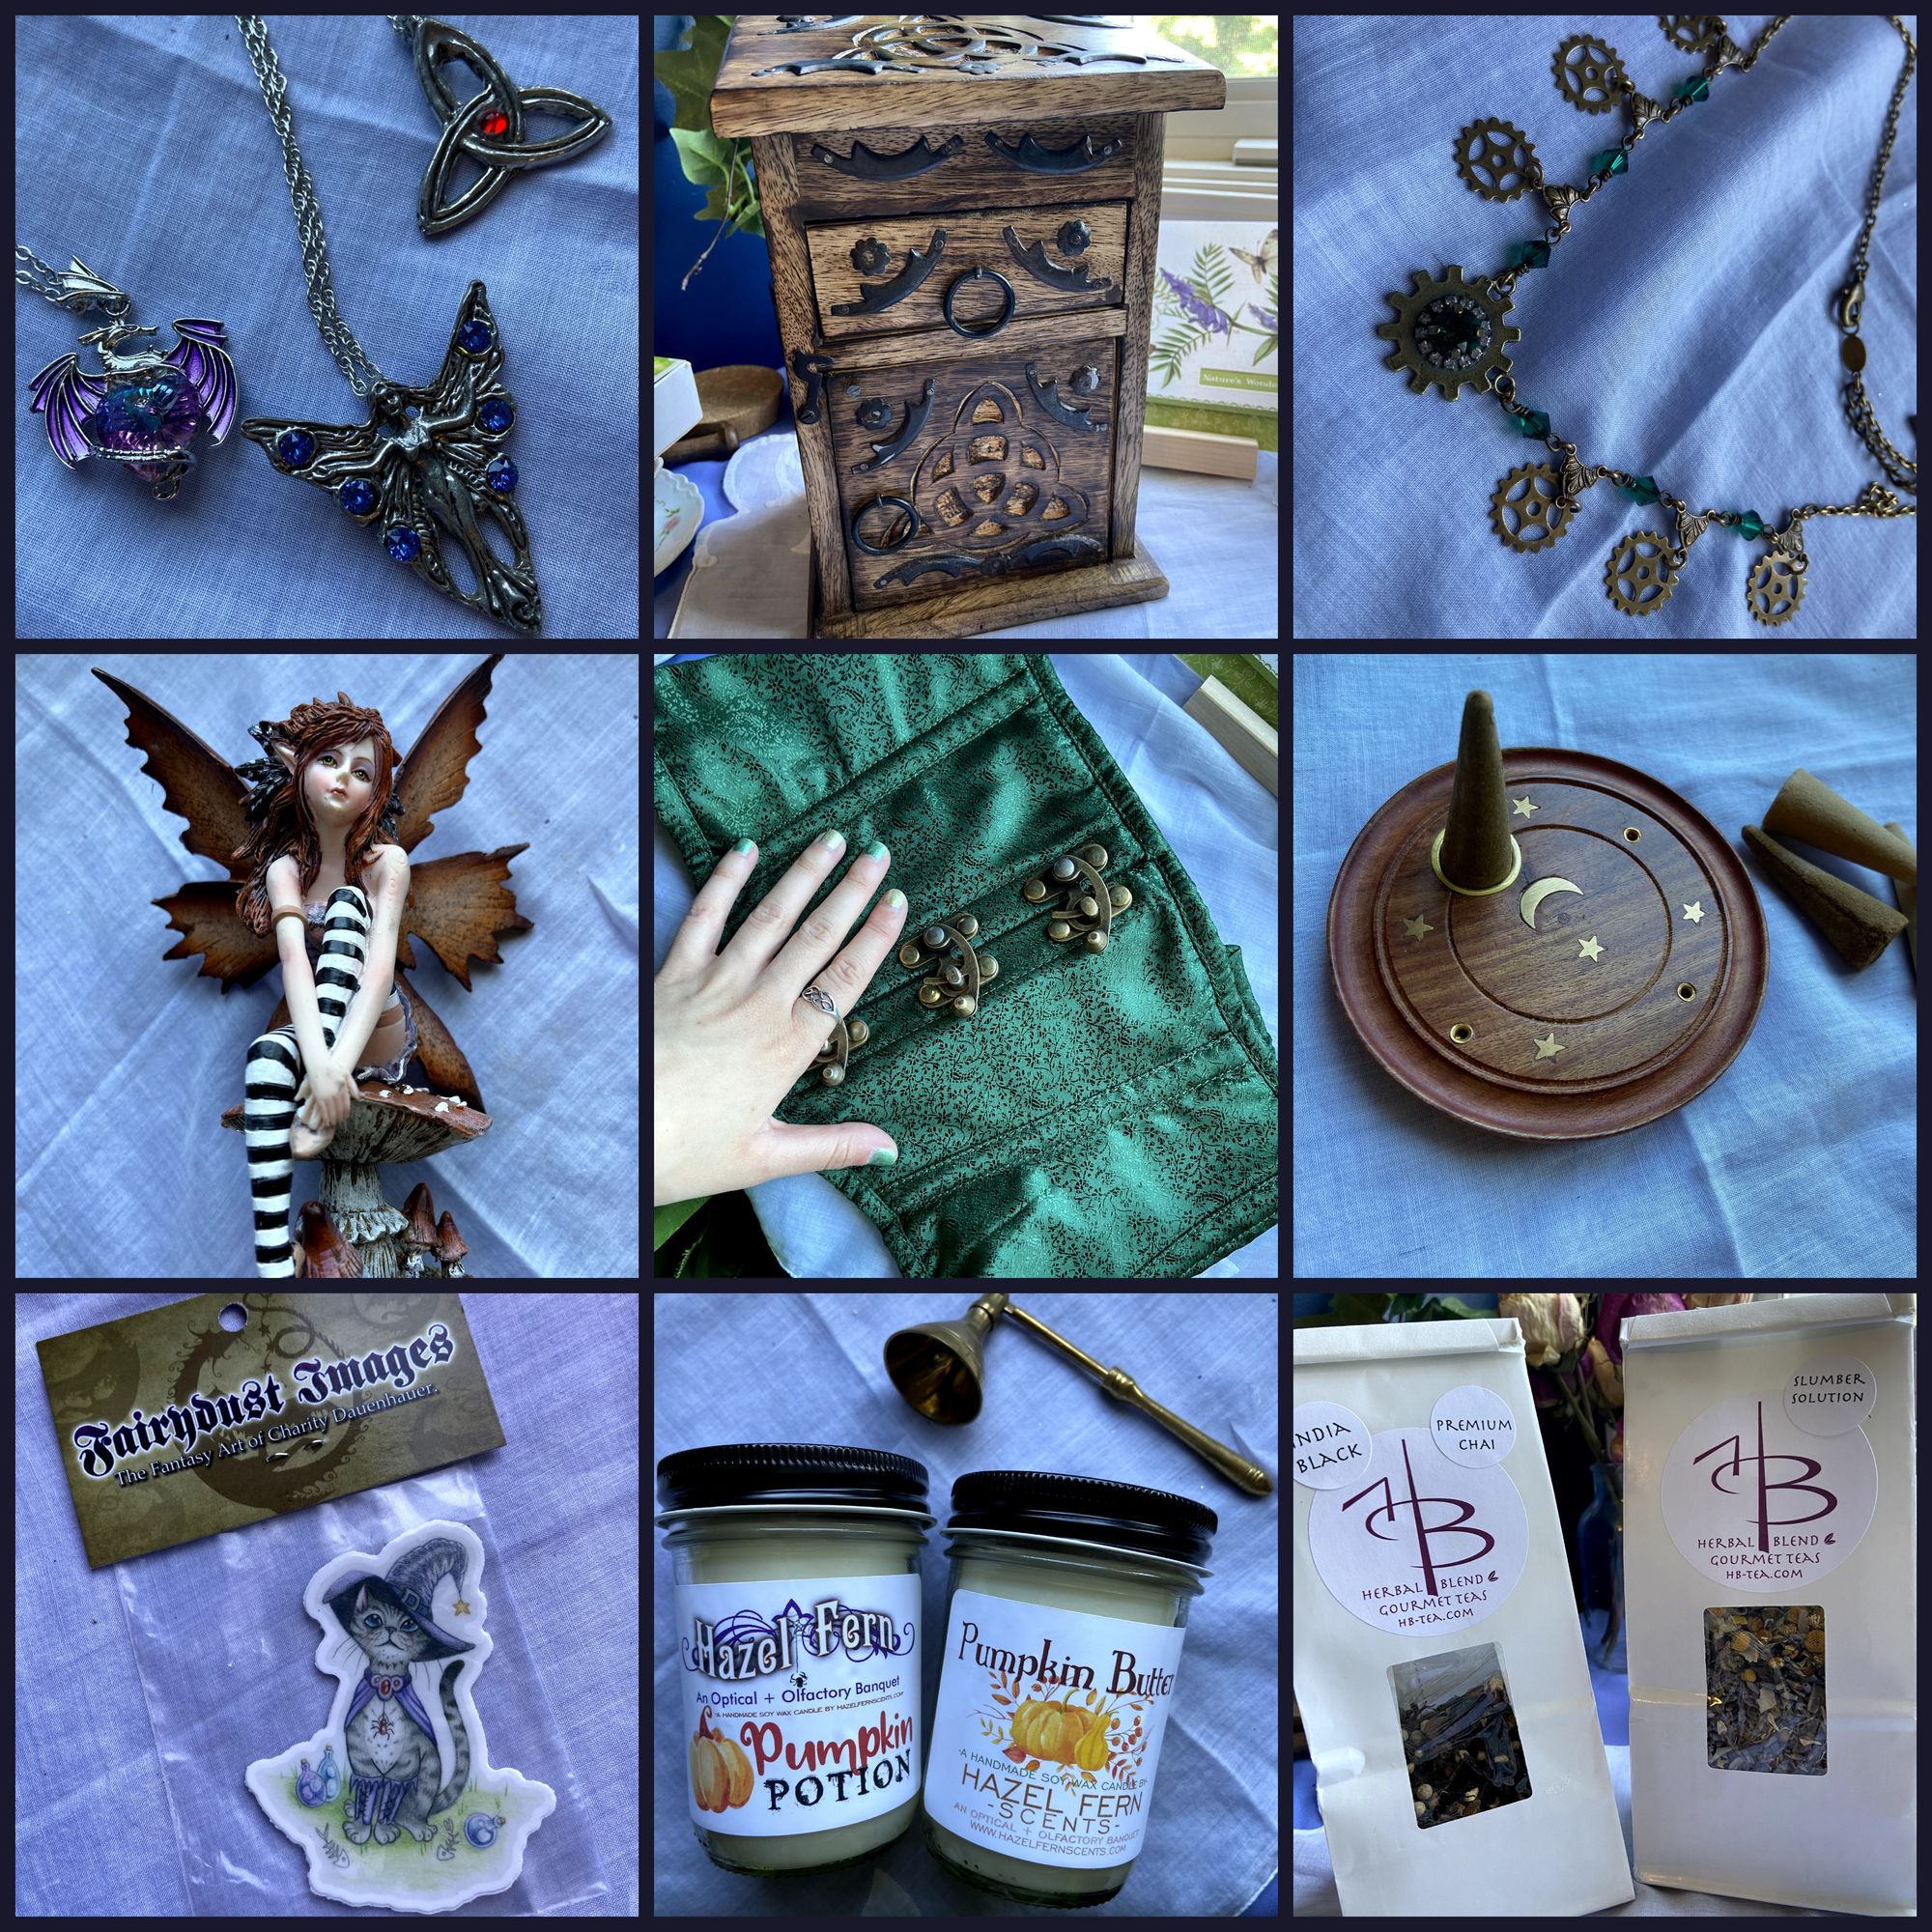 9 photos: 3 metal charms, a Celtic knot cupboard, steampunk necklace, Amy Brown fairy statue, corset, incense, wizard cat sticker, 2 candles, 2 types of tea